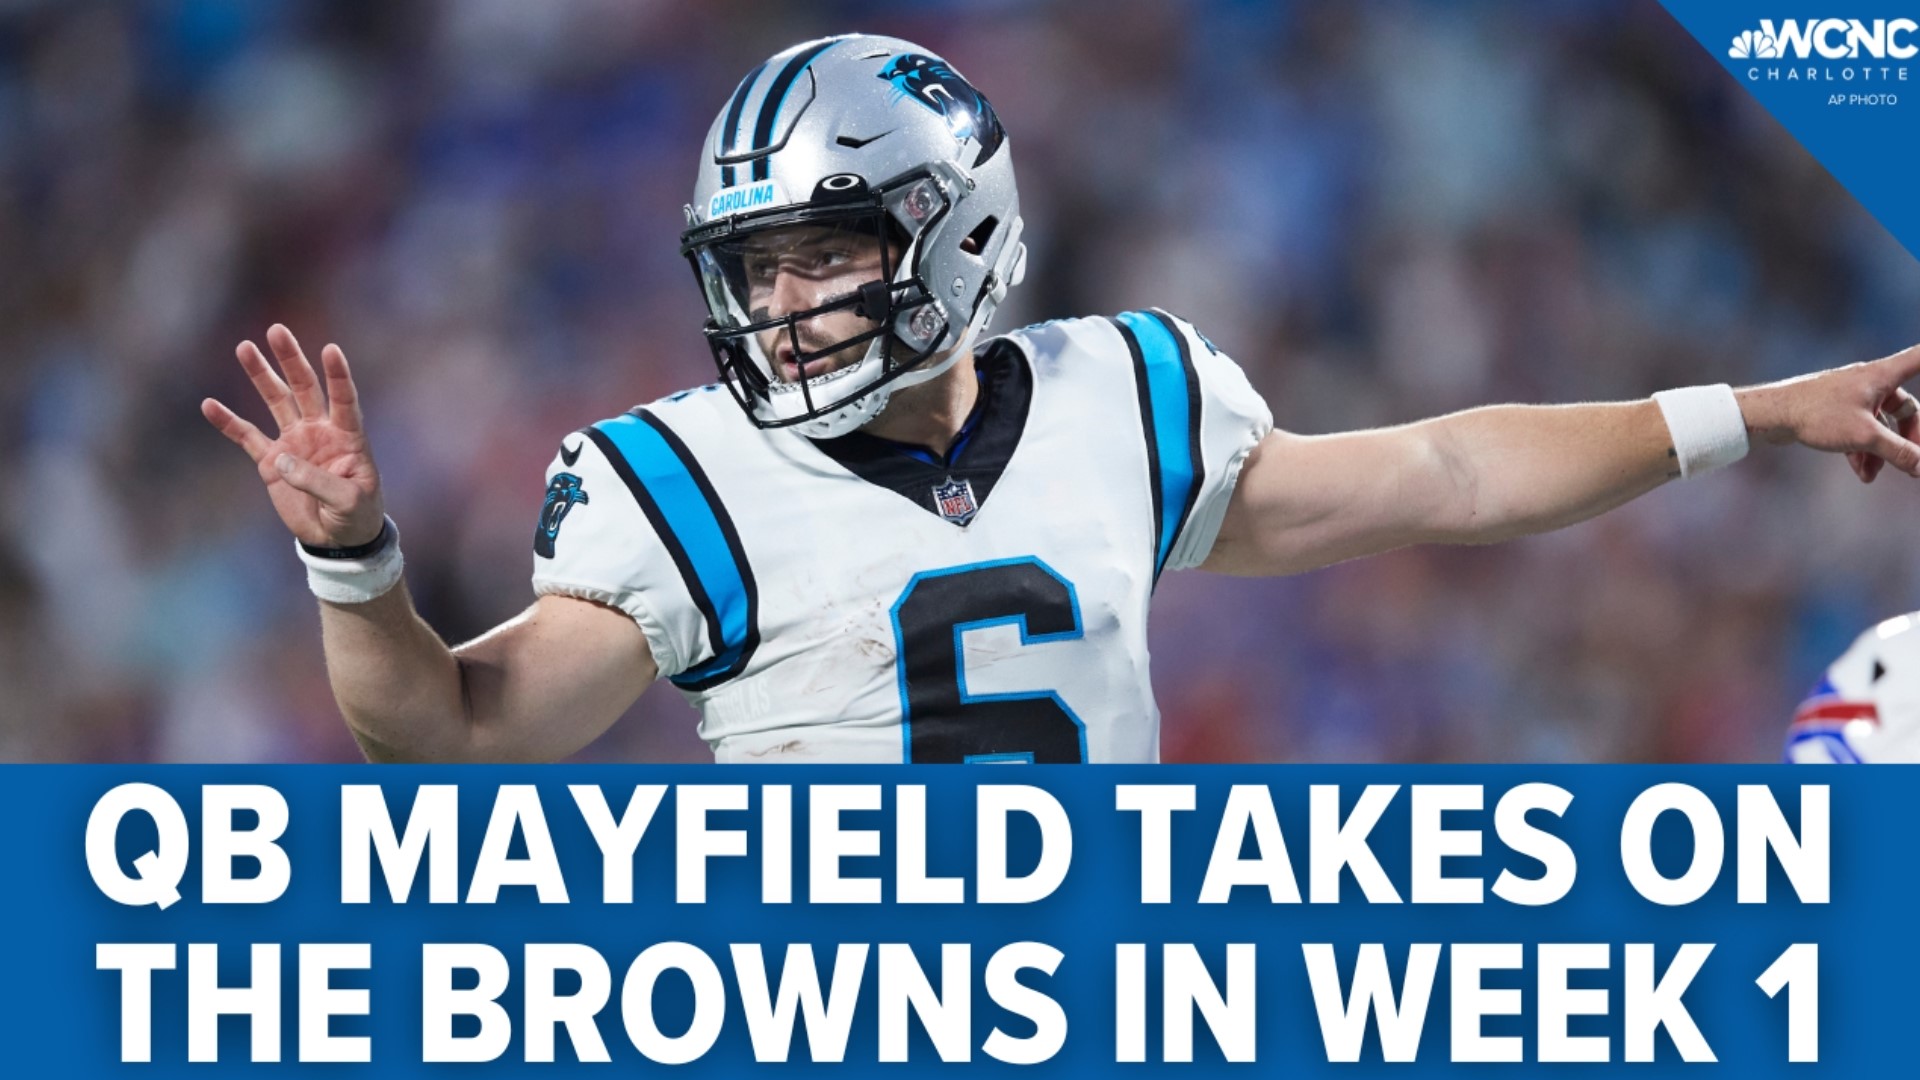 WKYC Sports Anchor Nick Camino joins WCNC Charlotte Sports Director Nick Carboni to discuss Baker Mayfield’s first game for the Panthers against his old team.